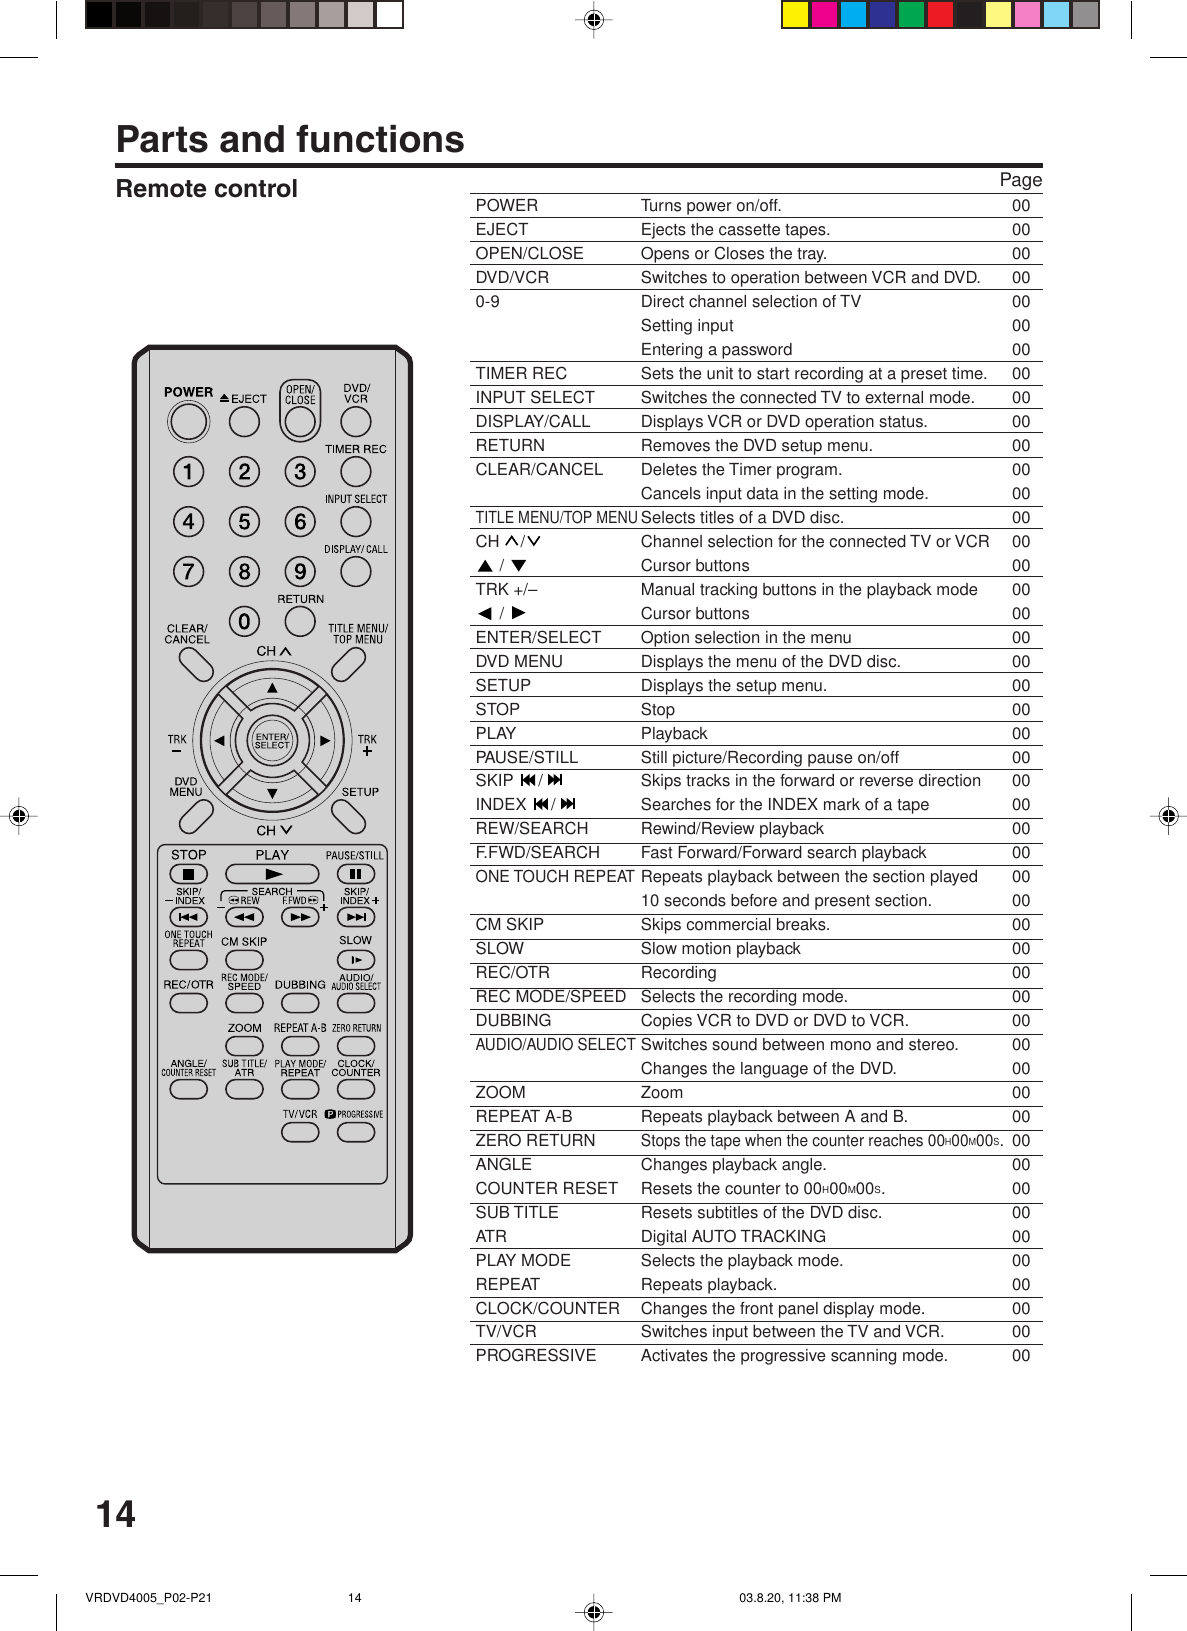 14Remote control PageParts and functionsPOWER Turns power on/off. 00EJECT Ejects the cassette tapes. 00OPEN/CLOSE Opens or Closes the tray. 00DVD/VCR Switches to operation between VCR and DVD. 000-9 Direct channel selection of TV 00Setting input 00Entering a password 00TIMER REC Sets the unit to start recording at a preset time. 00INPUT SELECT Switches the connected TV to external mode. 00DISPLAY/CALL Displays VCR or DVD operation status. 00RETURN Removes the DVD setup menu. 00CLEAR/CANCEL Deletes the Timer program. 00Cancels input data in the setting mode. 00TITLE MENU/TOP MENUSelects titles of a DVD disc. 00CH  / Channel selection for the connected TV or VCR 00 /  Cursor buttons 00TRK +/– Manual tracking buttons in the playback mode 00 /  Cursor buttons 00ENTER/SELECT Option selection in the menu 00DVD MENU Displays the menu of the DVD disc. 00SETUP Displays the setup menu. 00STOP Stop 00PLAY Playback 00PAUSE/STILL Still picture/Recording pause on/off 00SKIP  / Skips tracks in the forward or reverse direction 00INDEX  / Searches for the INDEX mark of a tape 00REW/SEARCH Rewind/Review playback 00F.FWD/SEARCH Fast Forward/Forward search playback 00ONE TOUCH REPEATRepeats playback between the section played 0010 seconds before and present section. 00CM SKIP Skips commercial breaks. 00SLOW Slow motion playback 00REC/OTR Recording 00REC MODE/SPEED Selects the recording mode. 00DUBBING Copies VCR to DVD or DVD to VCR. 00AUDIO/AUDIO SELECTSwitches sound between mono and stereo. 00Changes the language of the DVD. 00ZOOM Zoom 00REPEAT A-B Repeats playback between A and B. 00ZERO RETURNStops the tape when the counter reaches 00H00M00S.00ANGLE Changes playback angle. 00COUNTER RESET Resets the counter to 00H00M00S.00SUB TITLE Resets subtitles of the DVD disc. 00ATR Digital AUTO TRACKING 00PLAY MODE Selects the playback mode. 00REPEAT Repeats playback. 00CLOCK/COUNTER Changes the front panel display mode. 00TV/VCR Switches input between the TV and VCR. 00PROGRESSIVE Activates the progressive scanning mode. 00VRDVD4005_P02-P21 03.8.20, 11:38 PM14